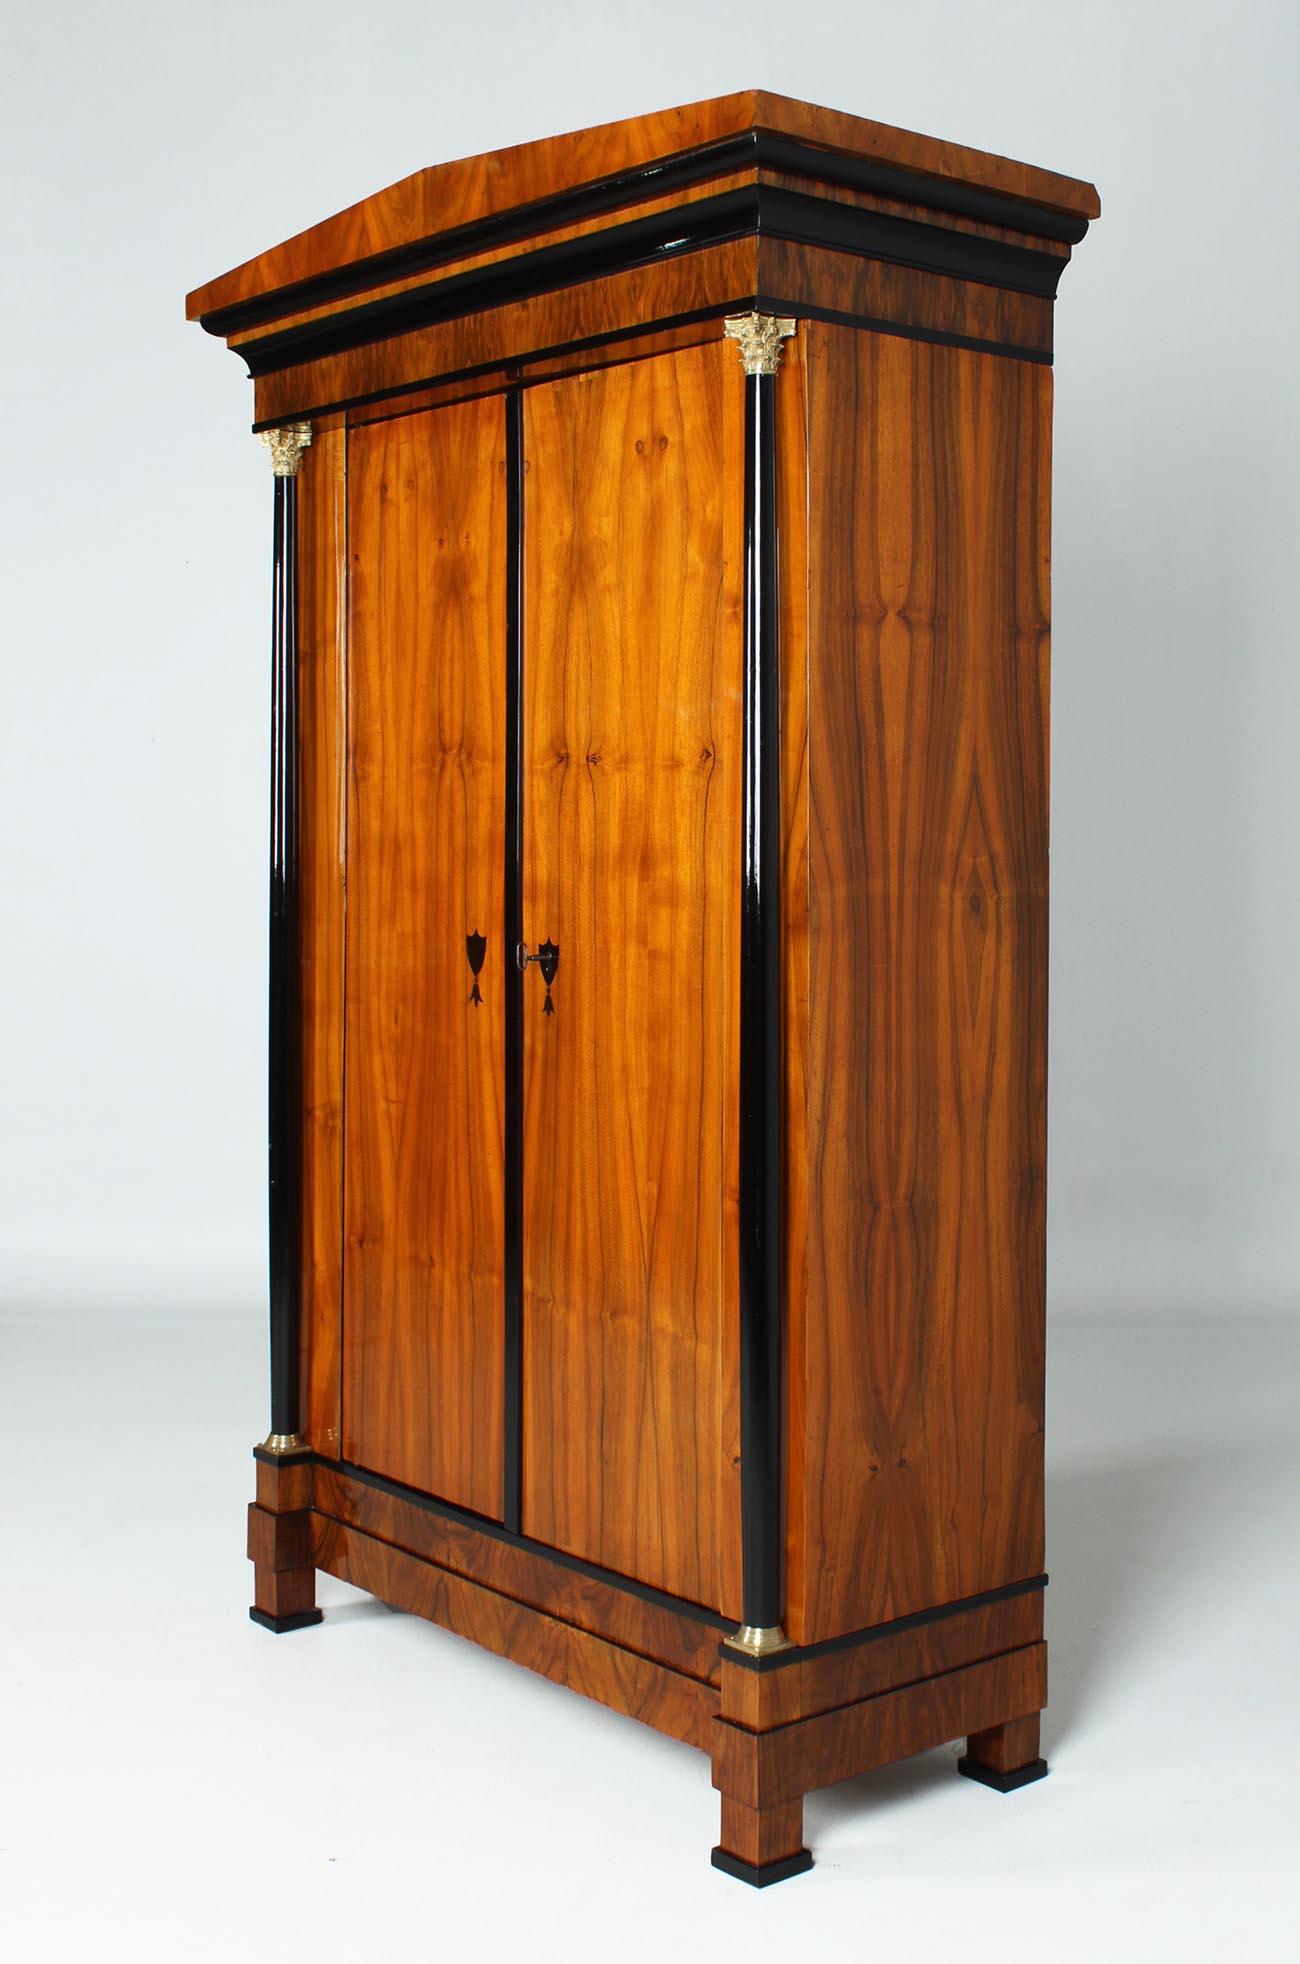 19th Century Biedermeier cabinet with columns

Southern Germany/Austria
Walnut
Biedermeier around 1820

Dimensions: H x W x D: 208 x 133 x 56 cm

The dimensions are taken at the head of the unit. The width and depth of the body are